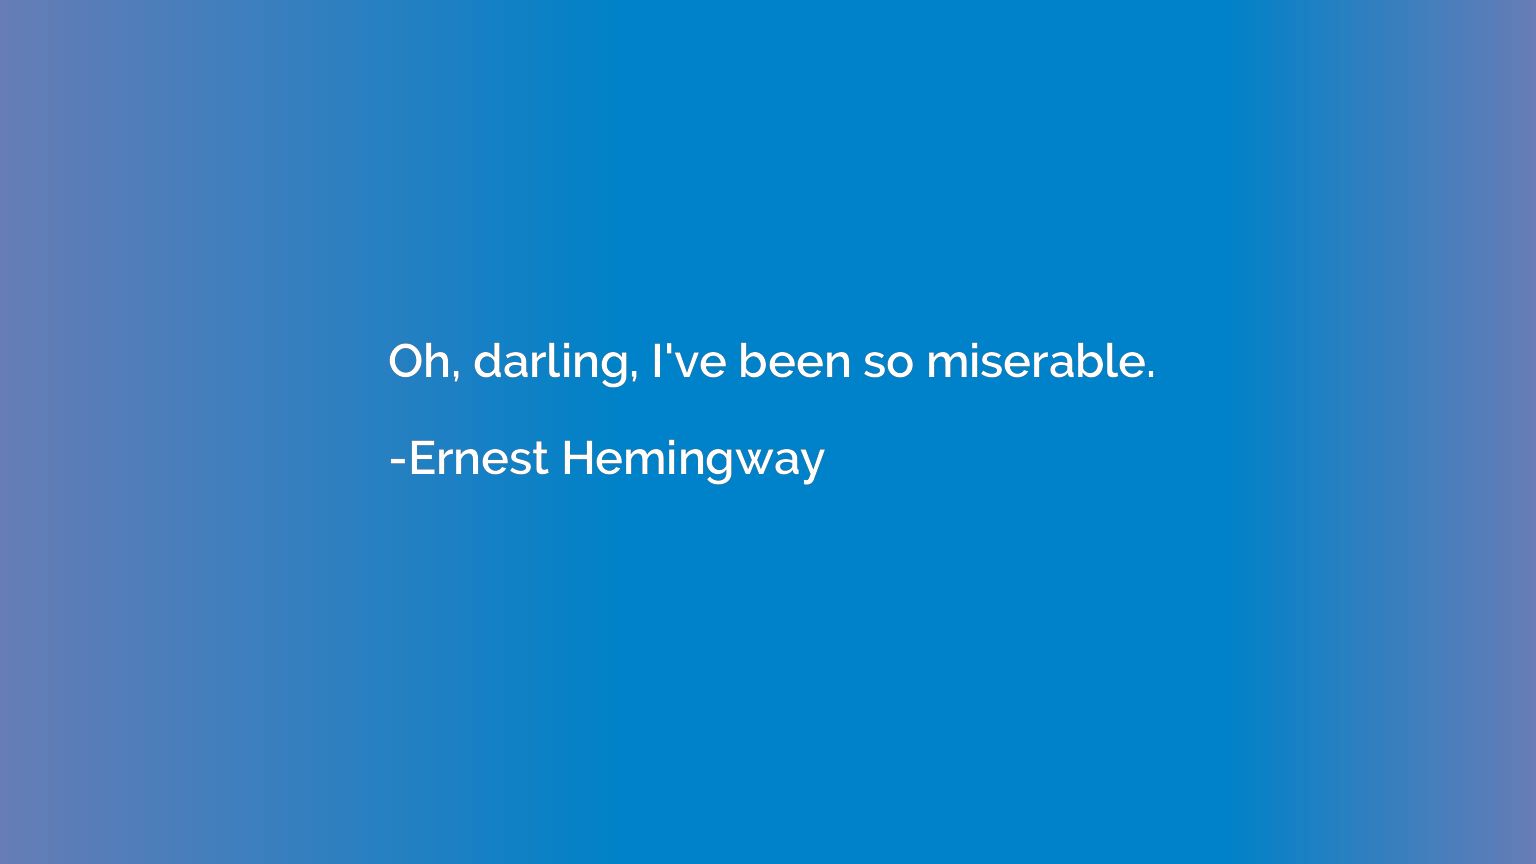 Oh, darling, I've been so miserable.